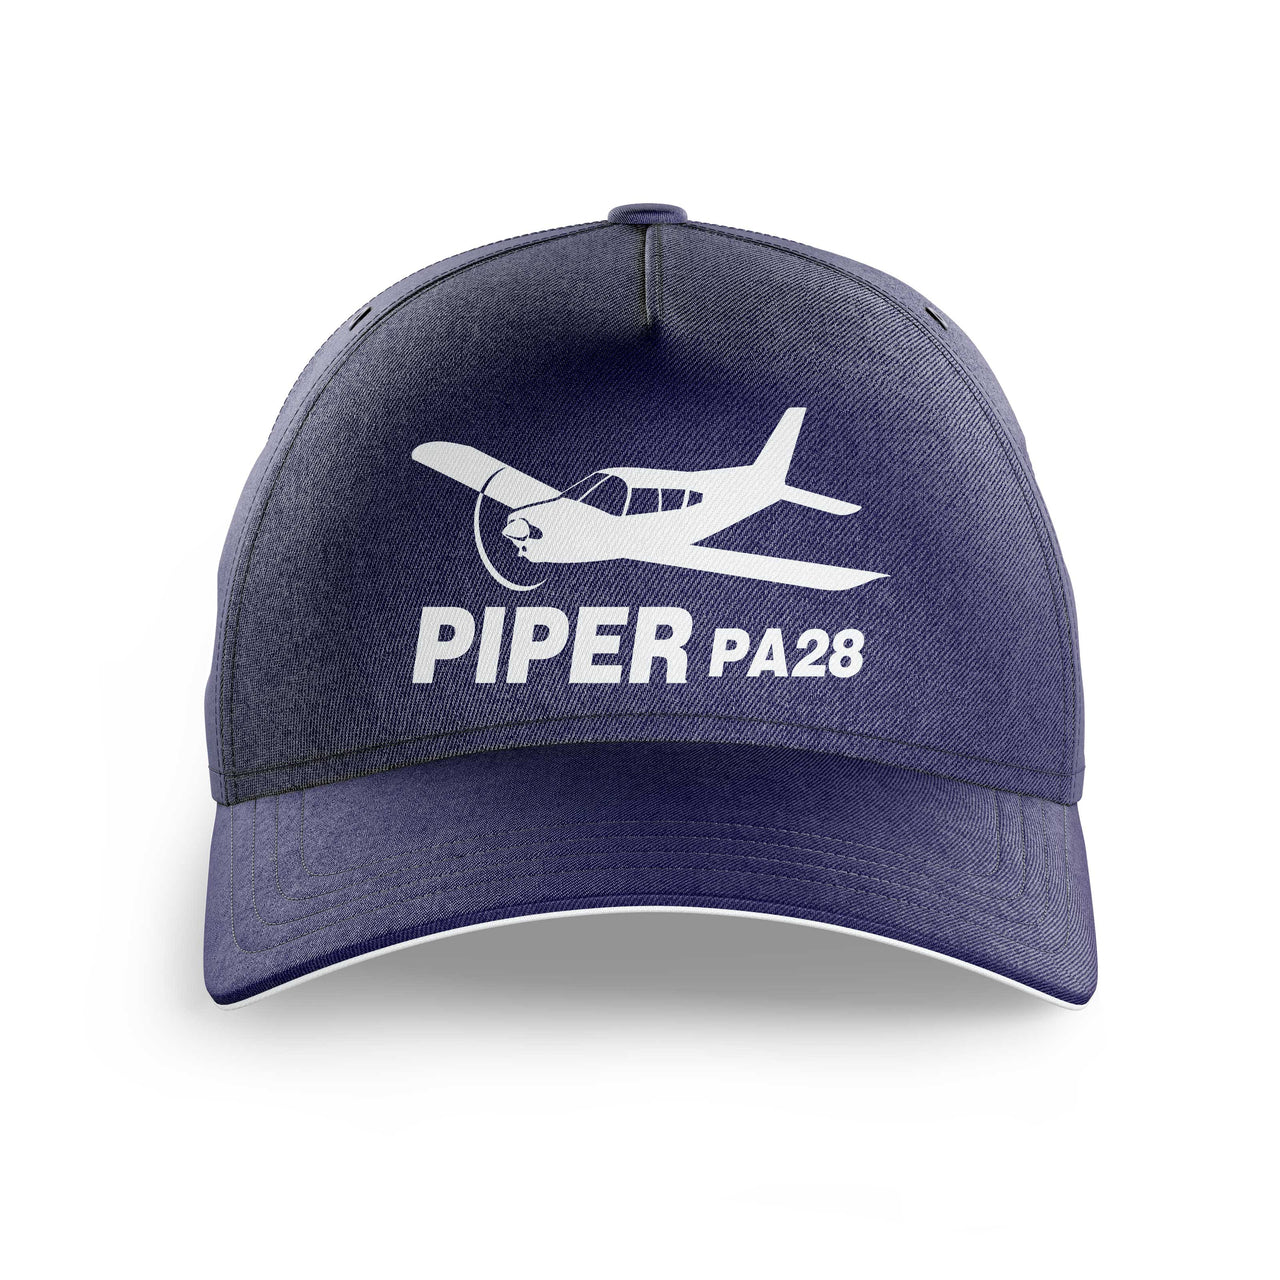 The Piper PA28 Printed Hats